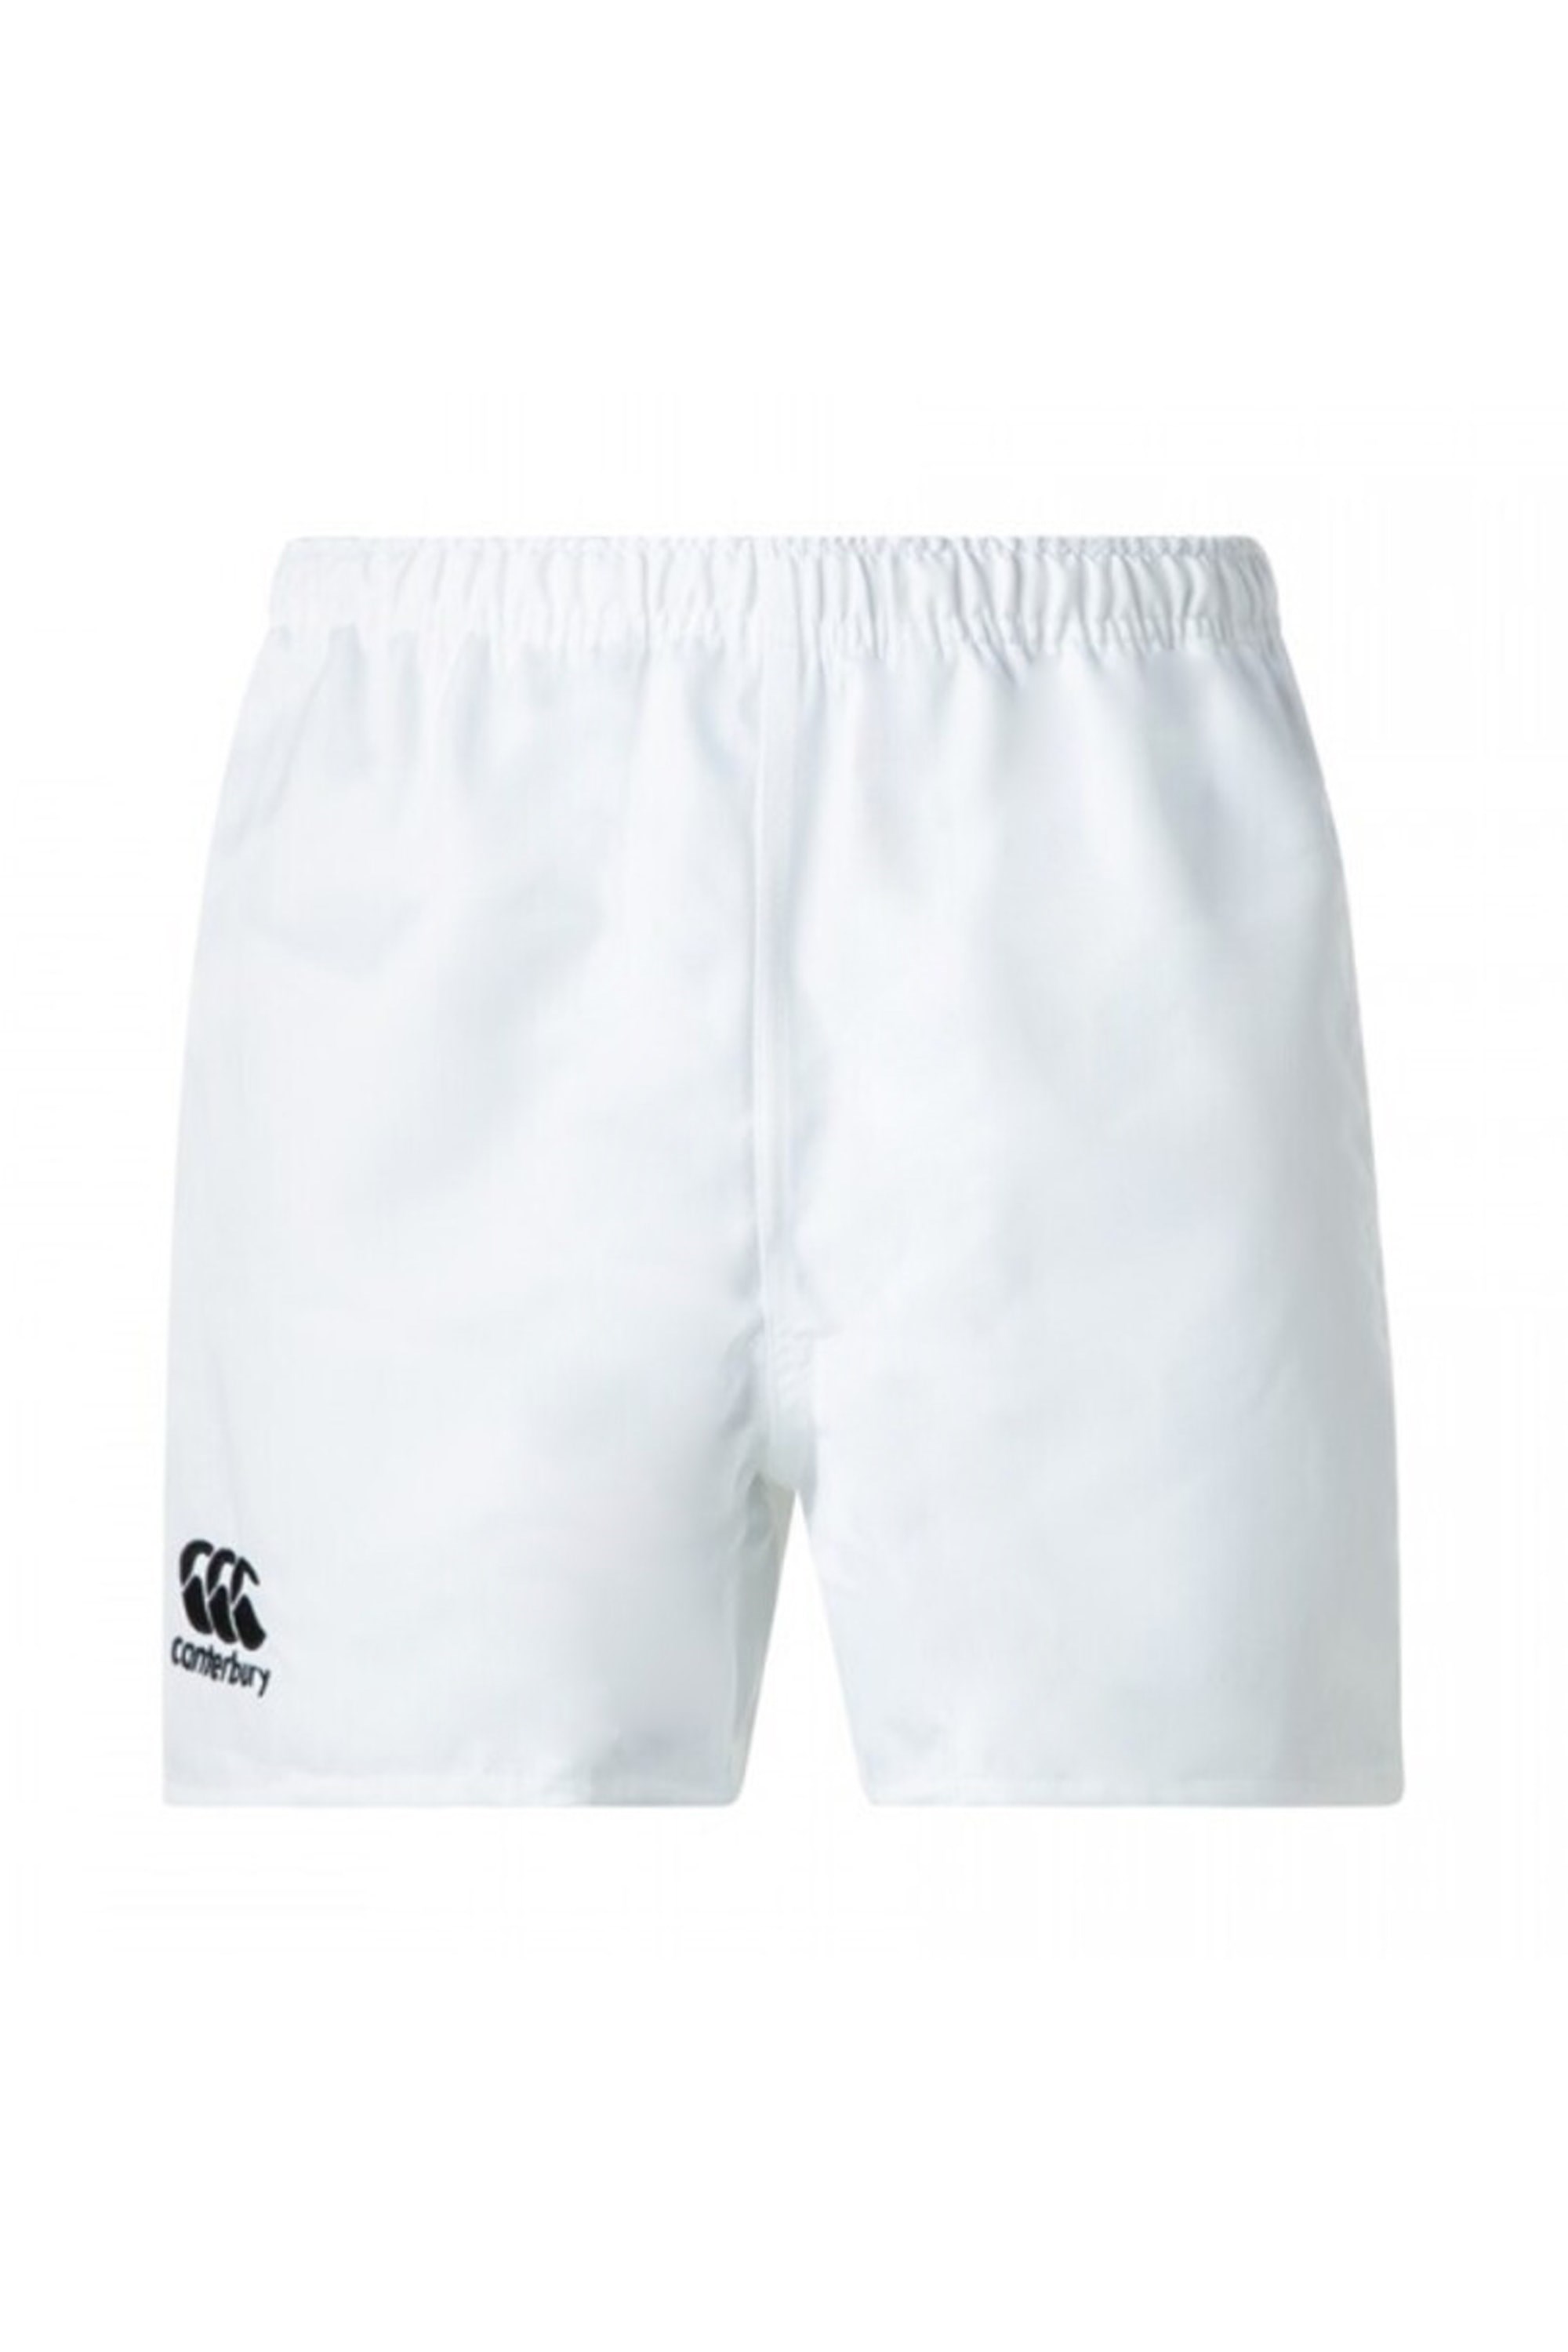 Professional Kids Polyester Shorts -